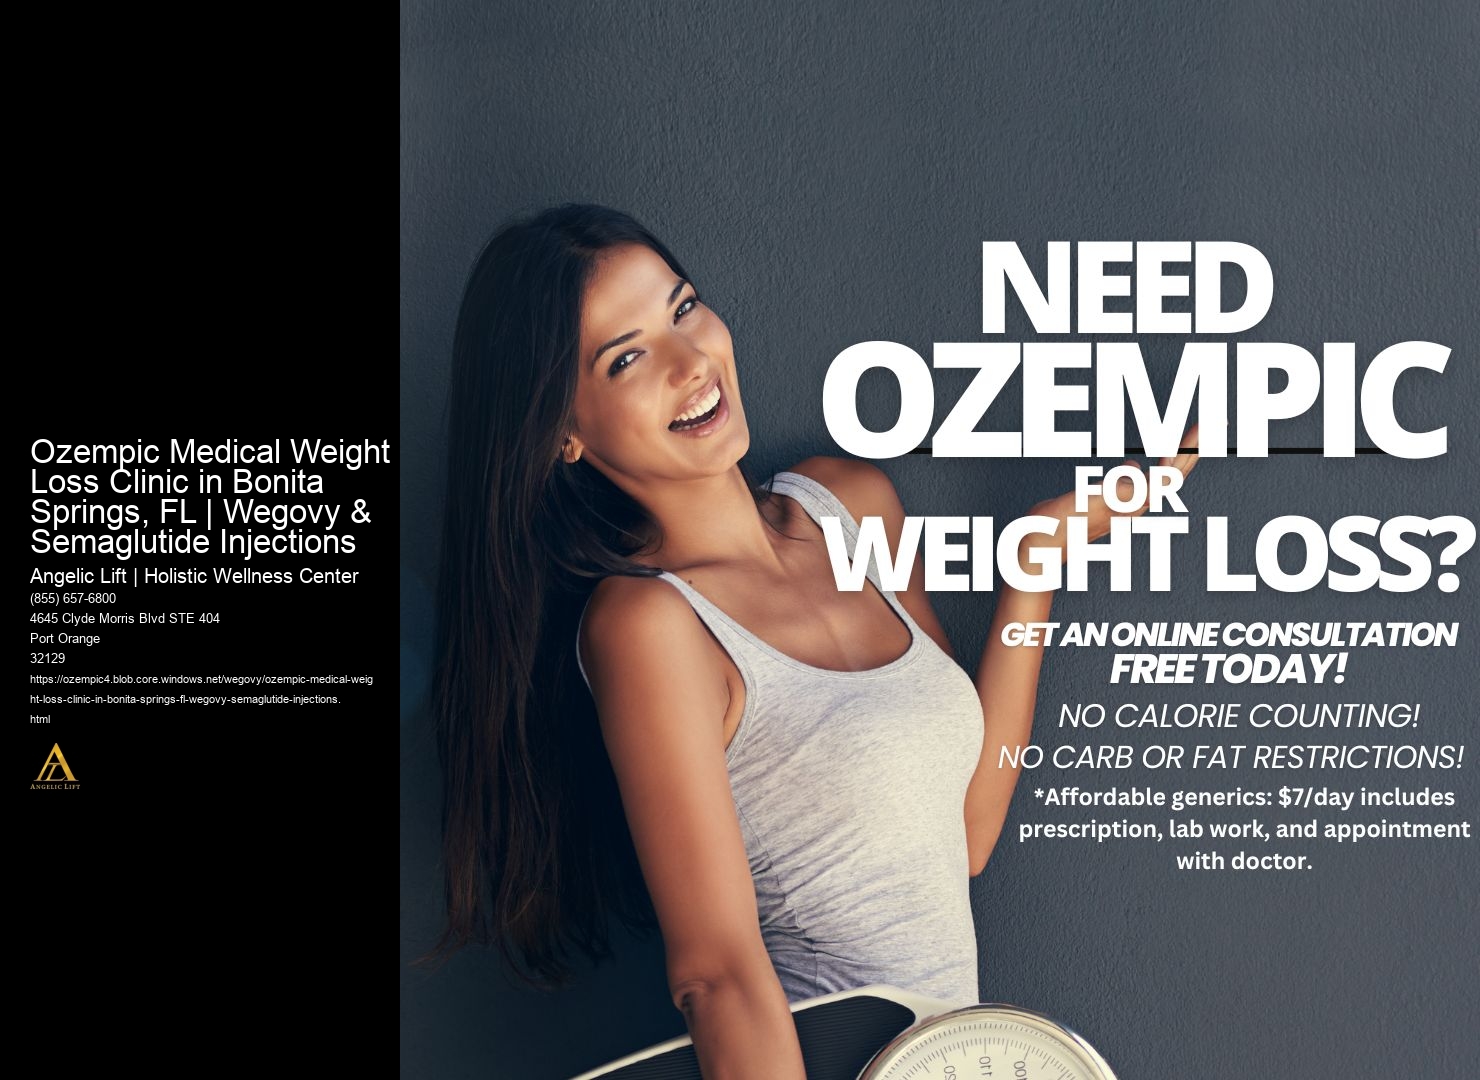 Ozempic Medical Weight Loss Clinic in Bonita Springs, FL | Wegovy & Semaglutide Injections